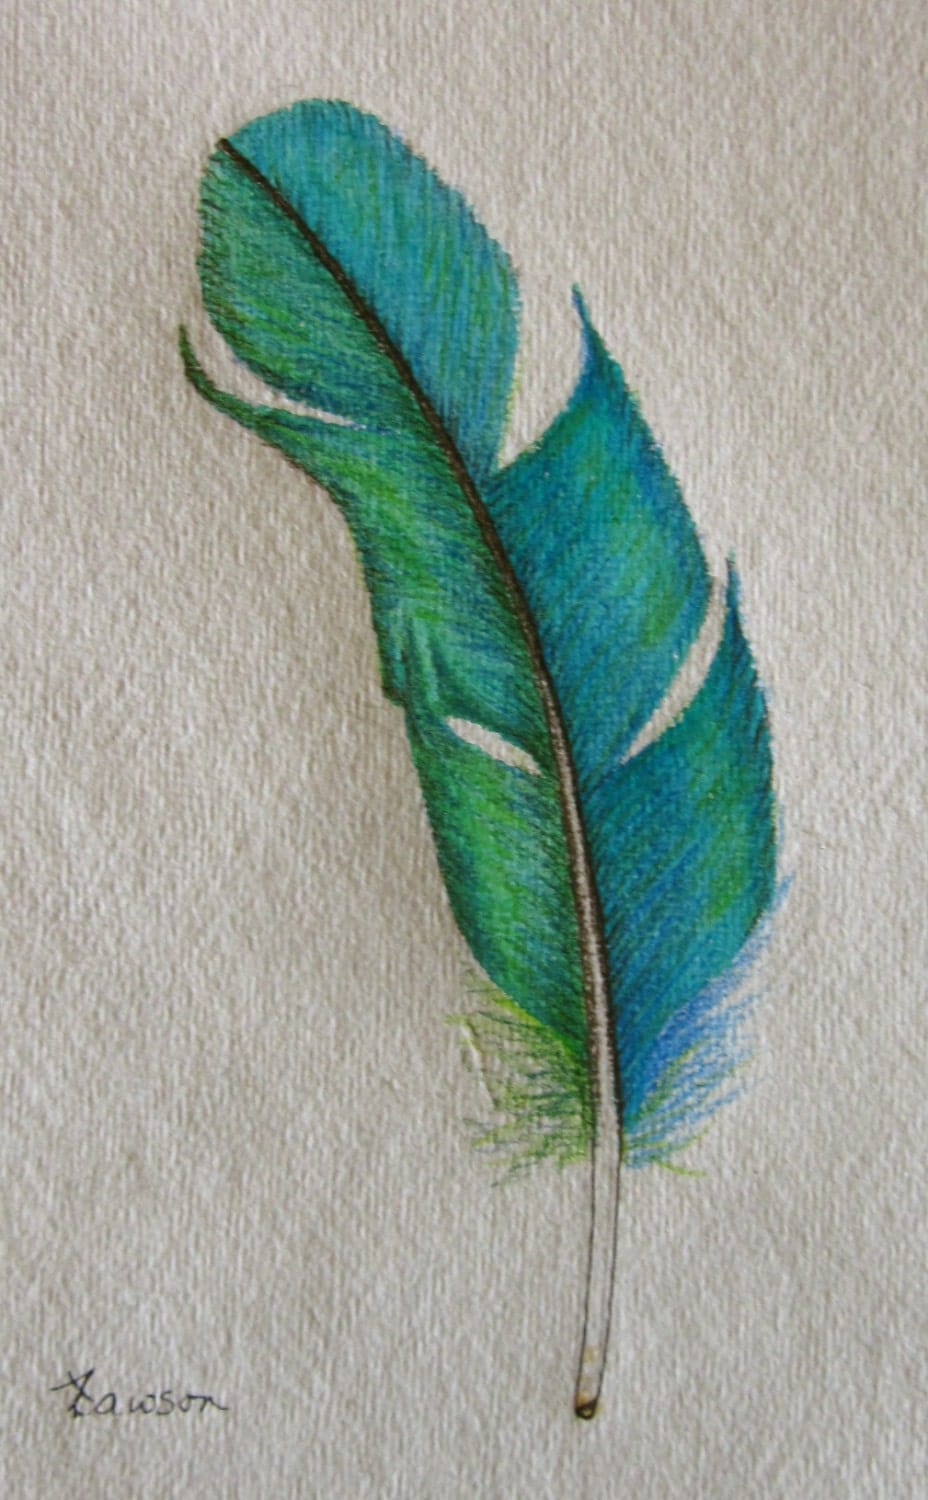 Teal Feather original coloured pencil drawing